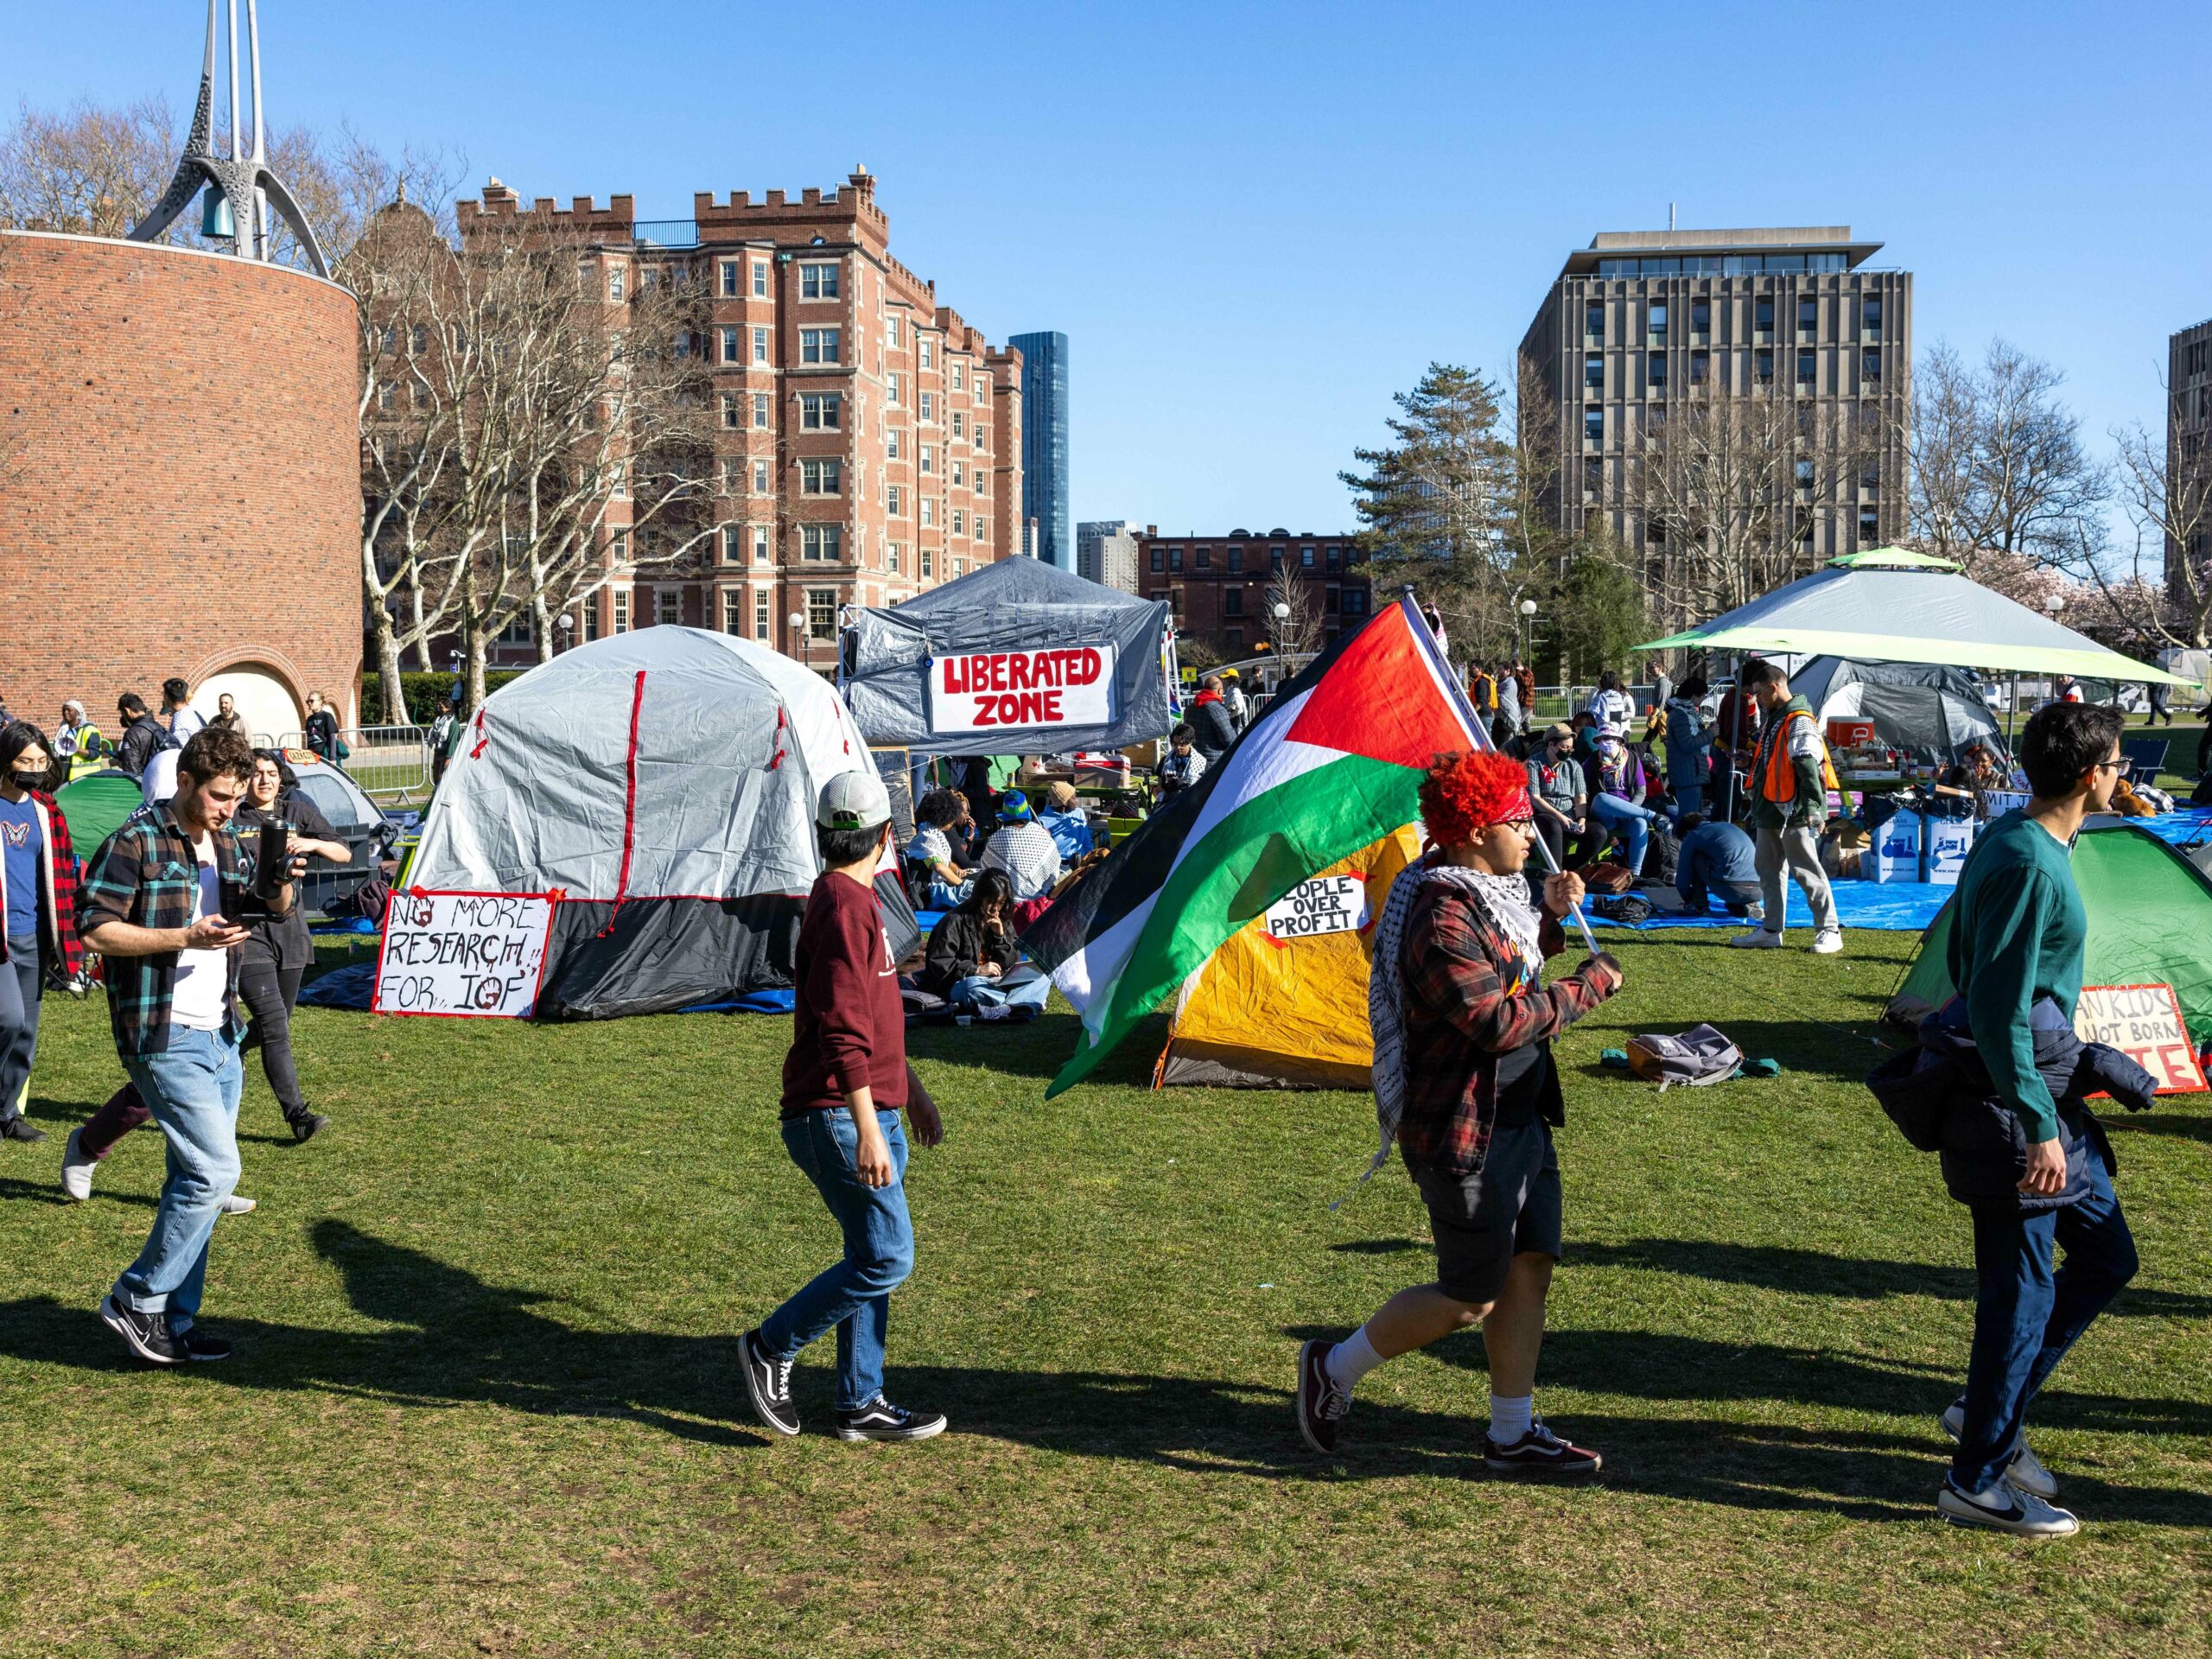 Students from MIT, Harvard University and others rally at a protest encampment at MIT's Kresge Lawn in Cambridge, Massachusetts on Monday.